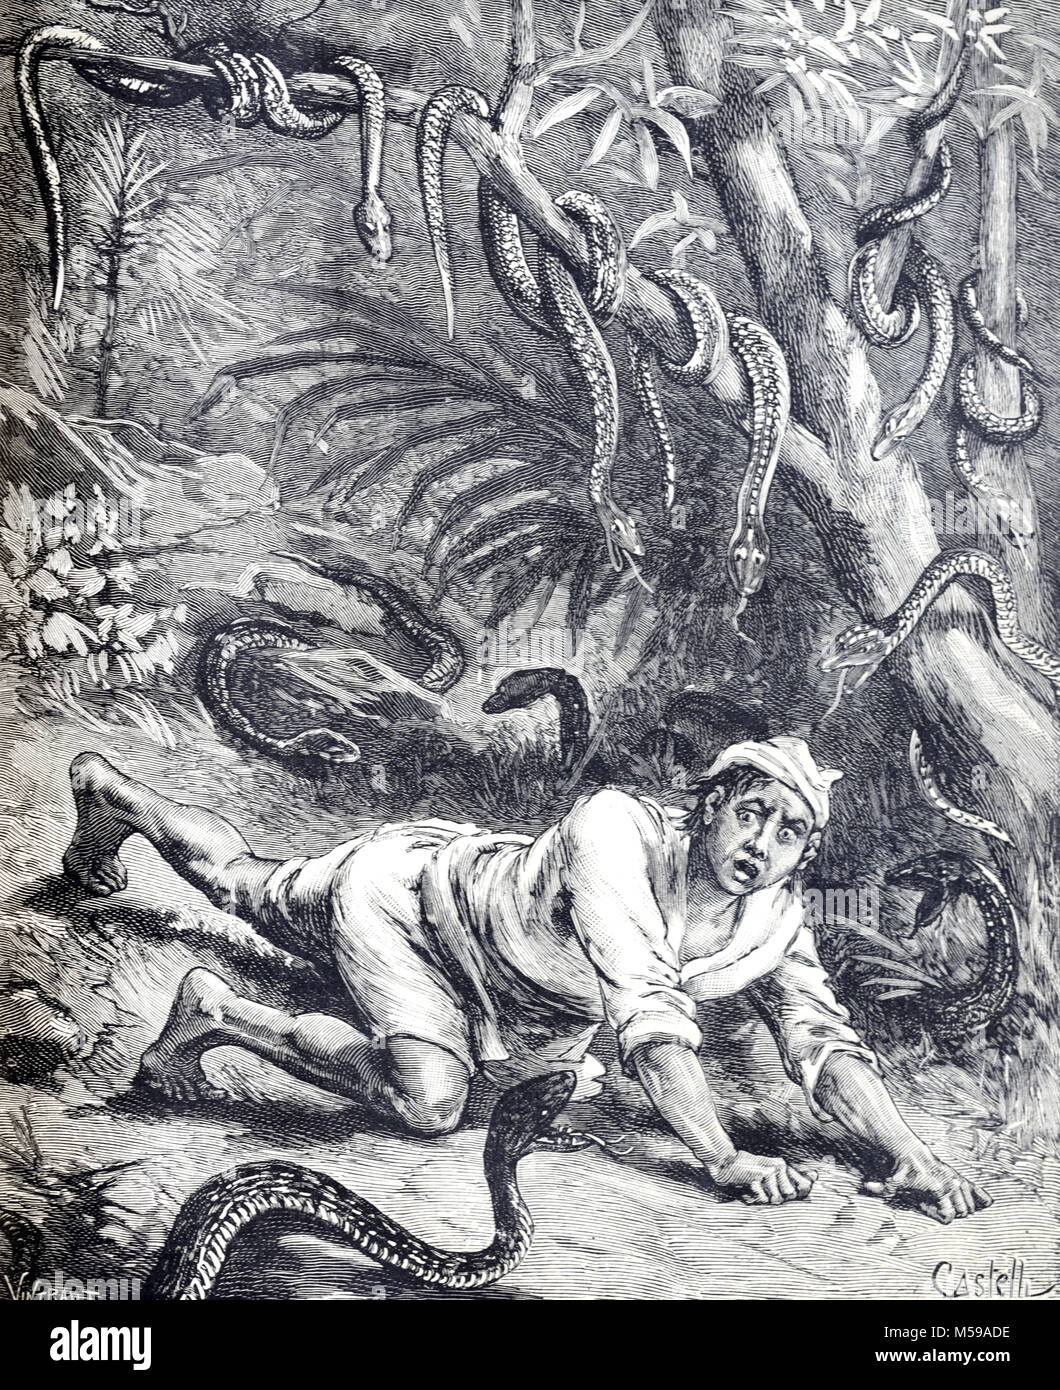 Asian Man or Villager Attacked by Snakes in Jungle or Tropical Forest in Siam or Thailand, South-East Asia. A form of snake phobia known as Ophidiophobia, Ophiophobia or, more generally, Herpetophobia (Engraving, 1889) Stock Photo